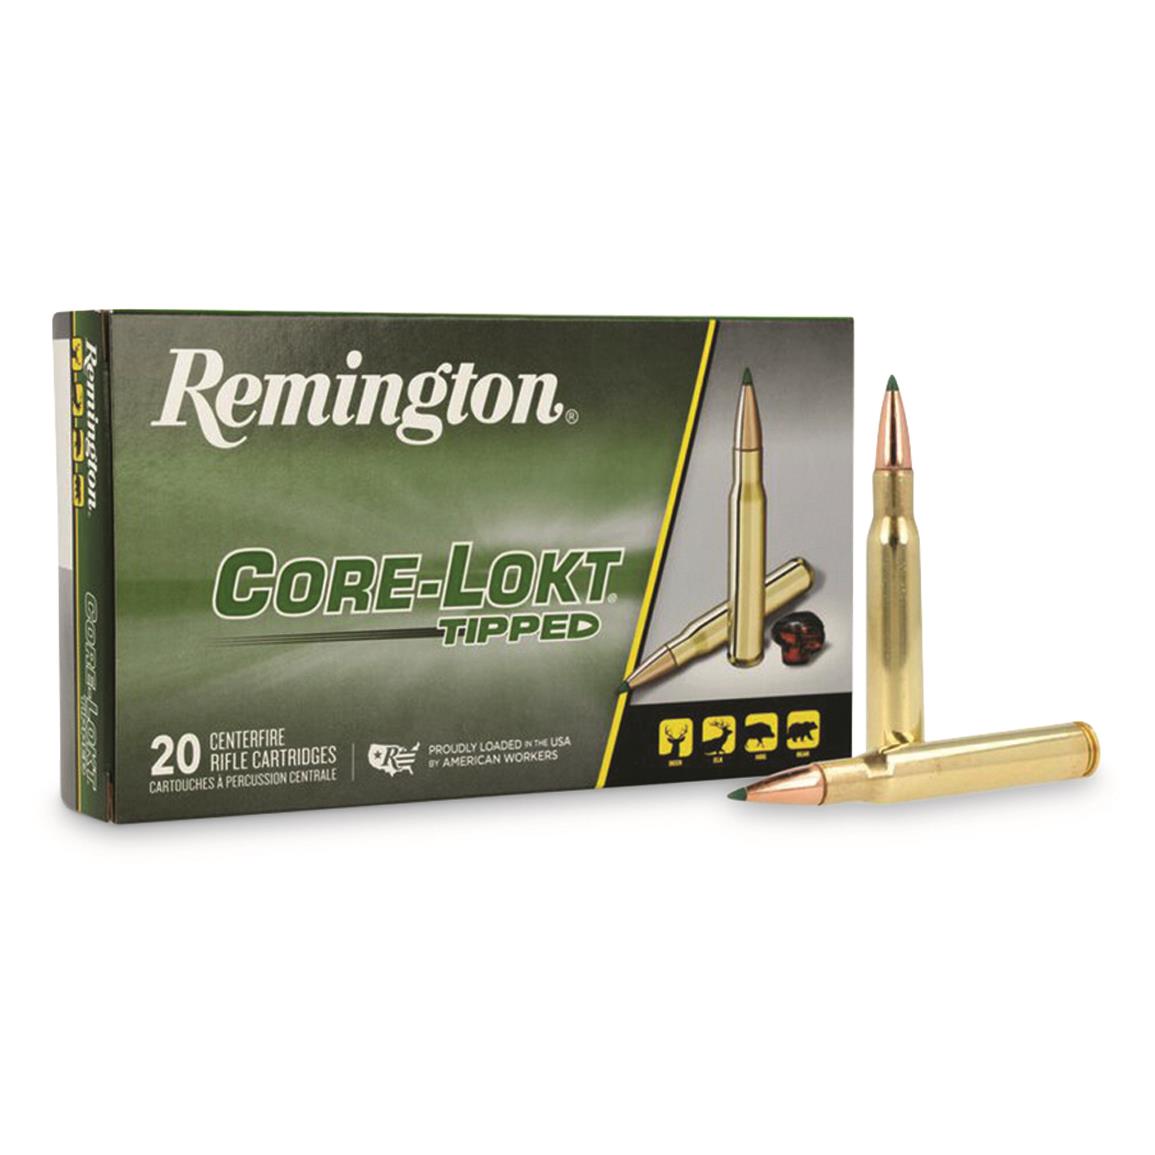 Remington Core-Lokt Tipped, .30-06 Springfield, Polymer Tip, 180 Grain, 20 Rounds